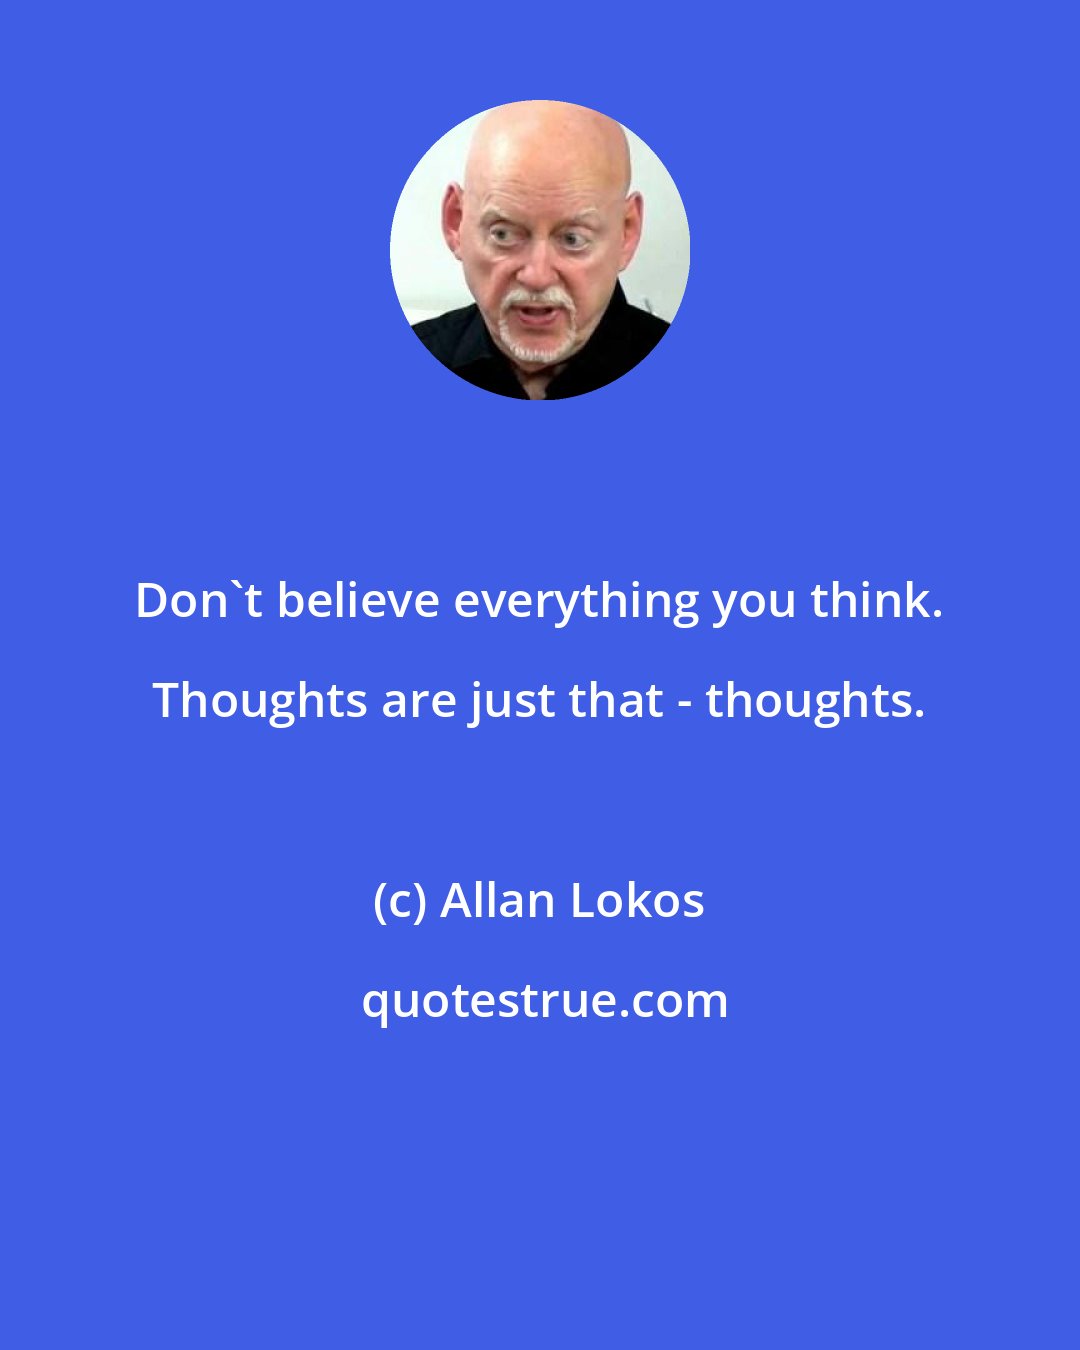 Allan Lokos: Don't believe everything you think. Thoughts are just that - thoughts.